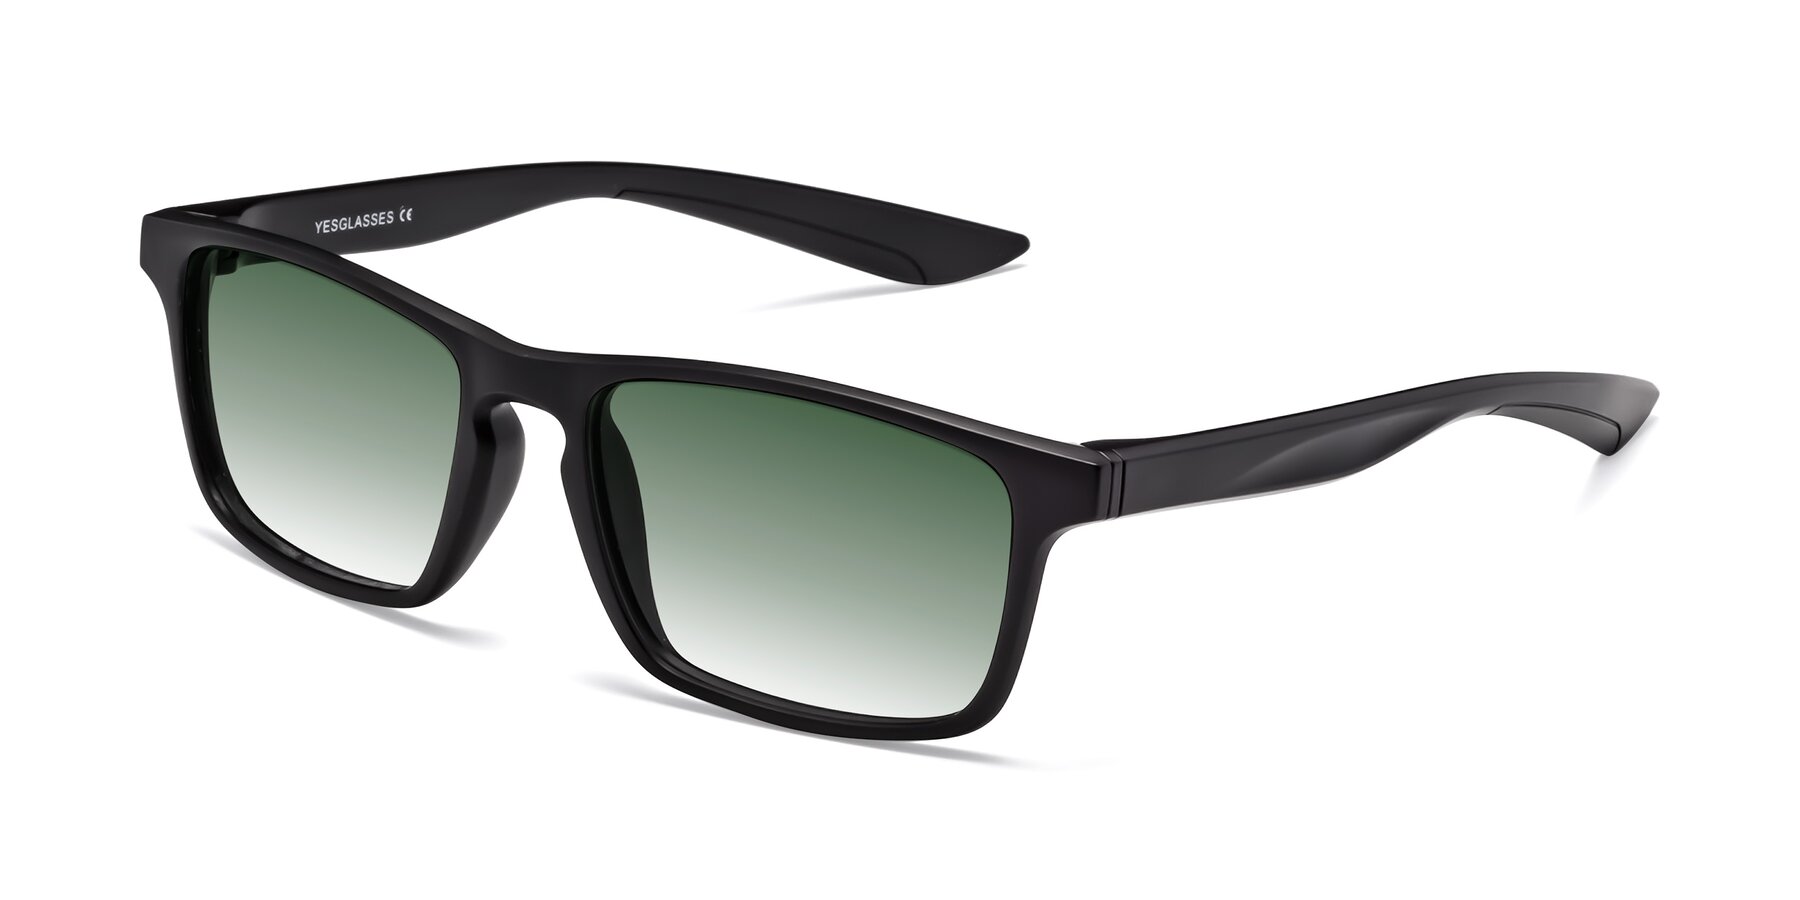 Angle of Passion in Matte Black with Green Gradient Lenses